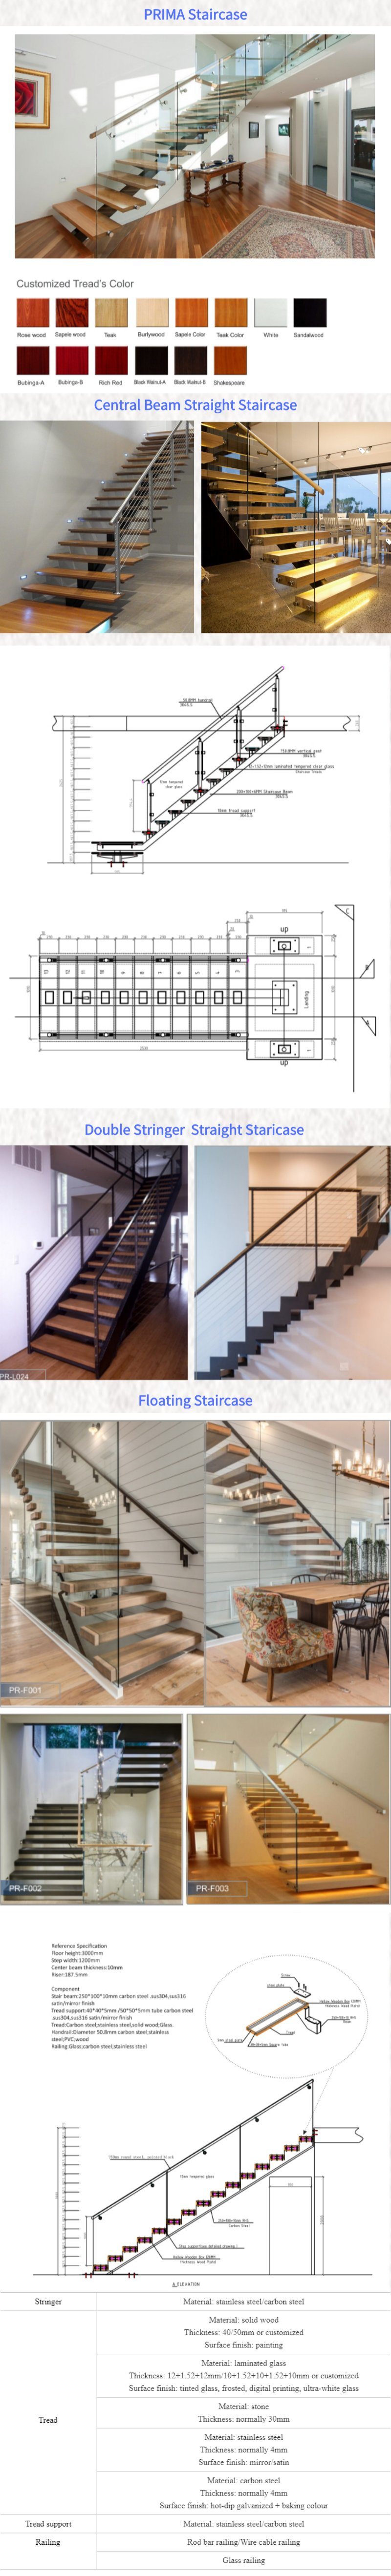 Decorative Wood Stairs Stainless Steel Staircases Handrails Design